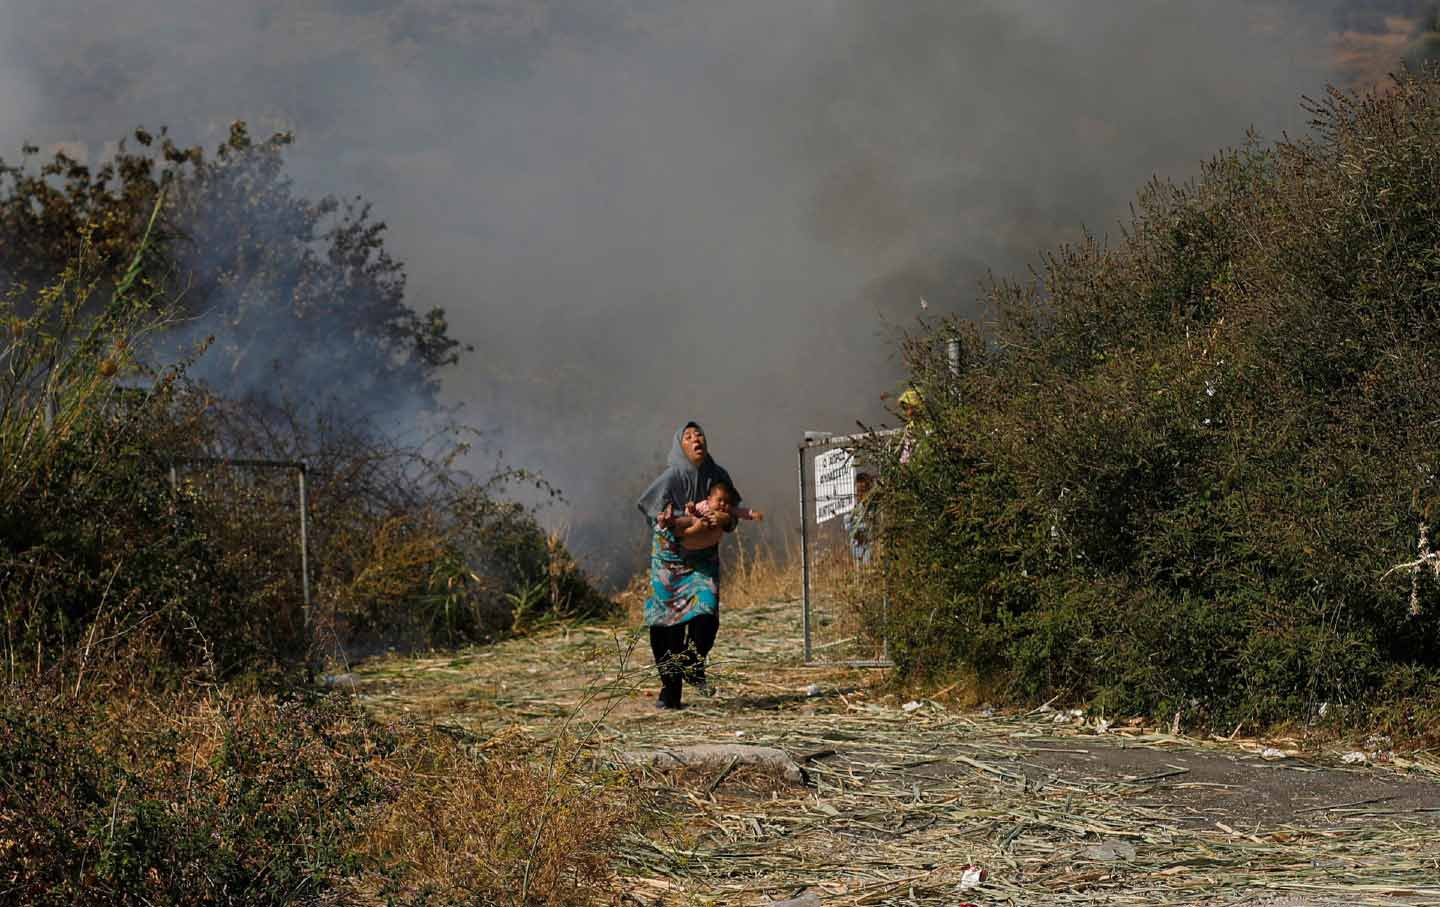 A migrant holds her baby as she runs to avoid a fire on the northeastern island of Lesbos, Greece, on September 12, 2020.